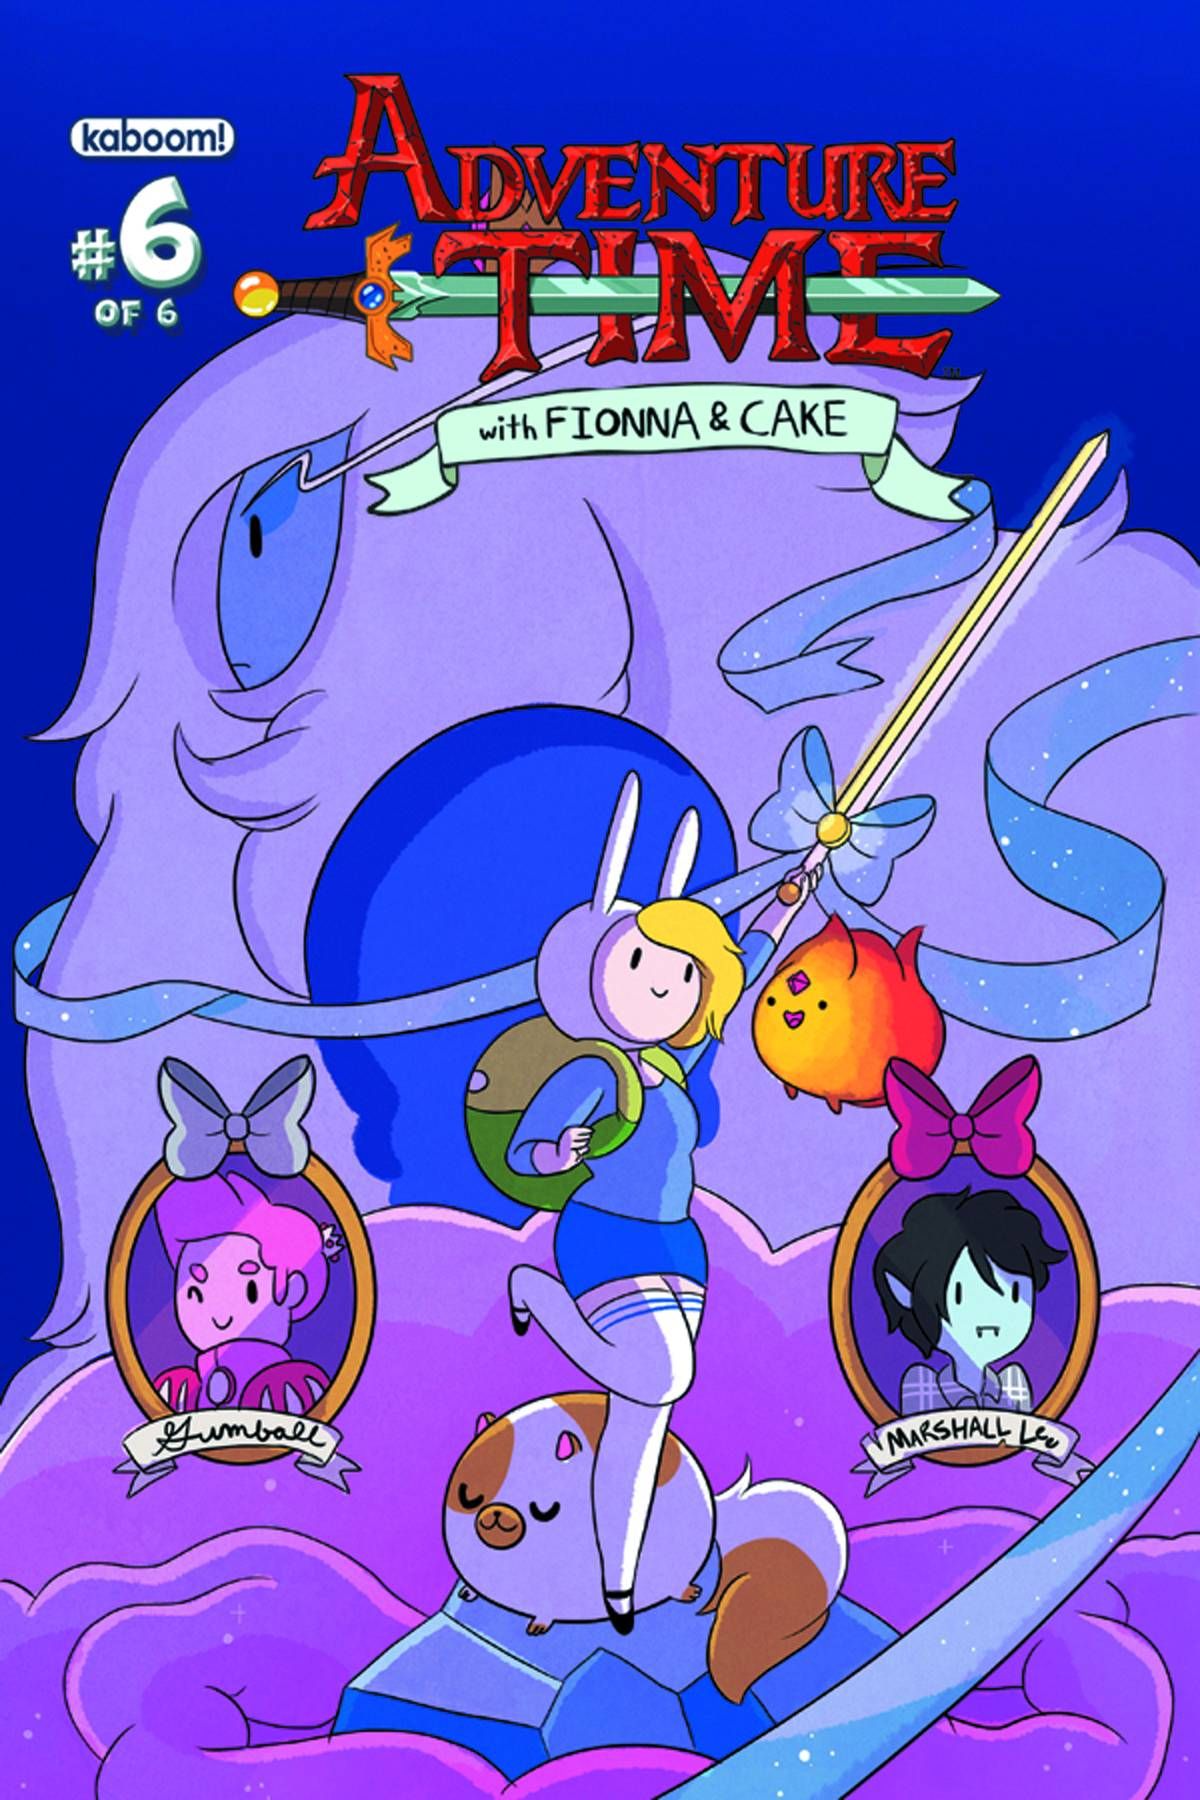 Adventure Time with Fionna and Cake #6 Comic